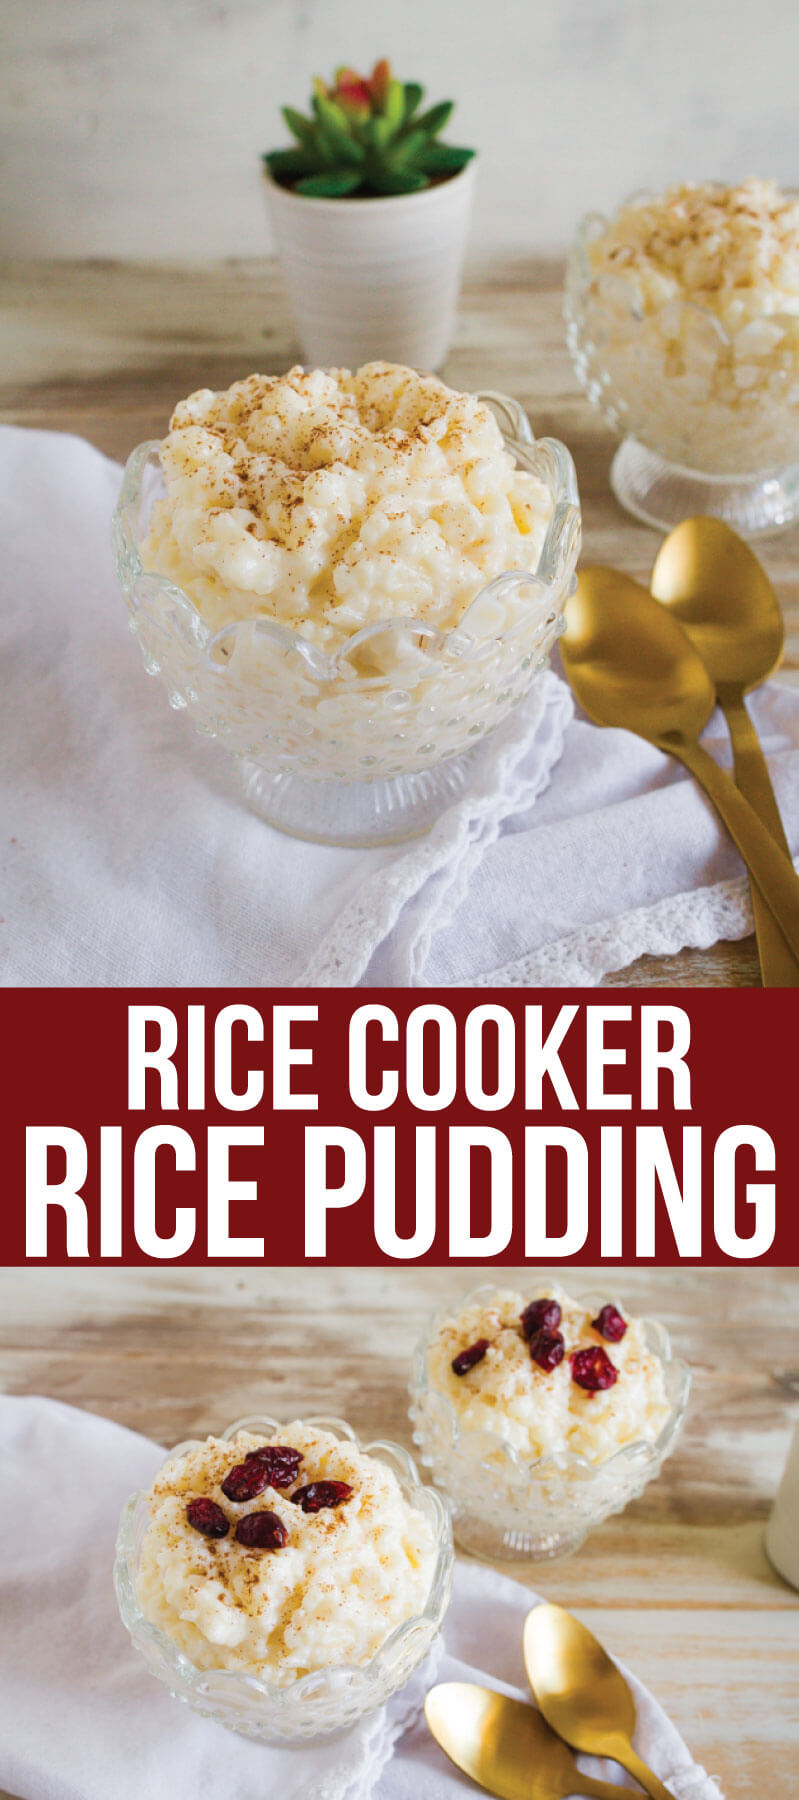 4 Ingredient Rice Cooker Rice Pudding - it's so easy to make and tastes so good! from www.thirtyhandmadedays.com